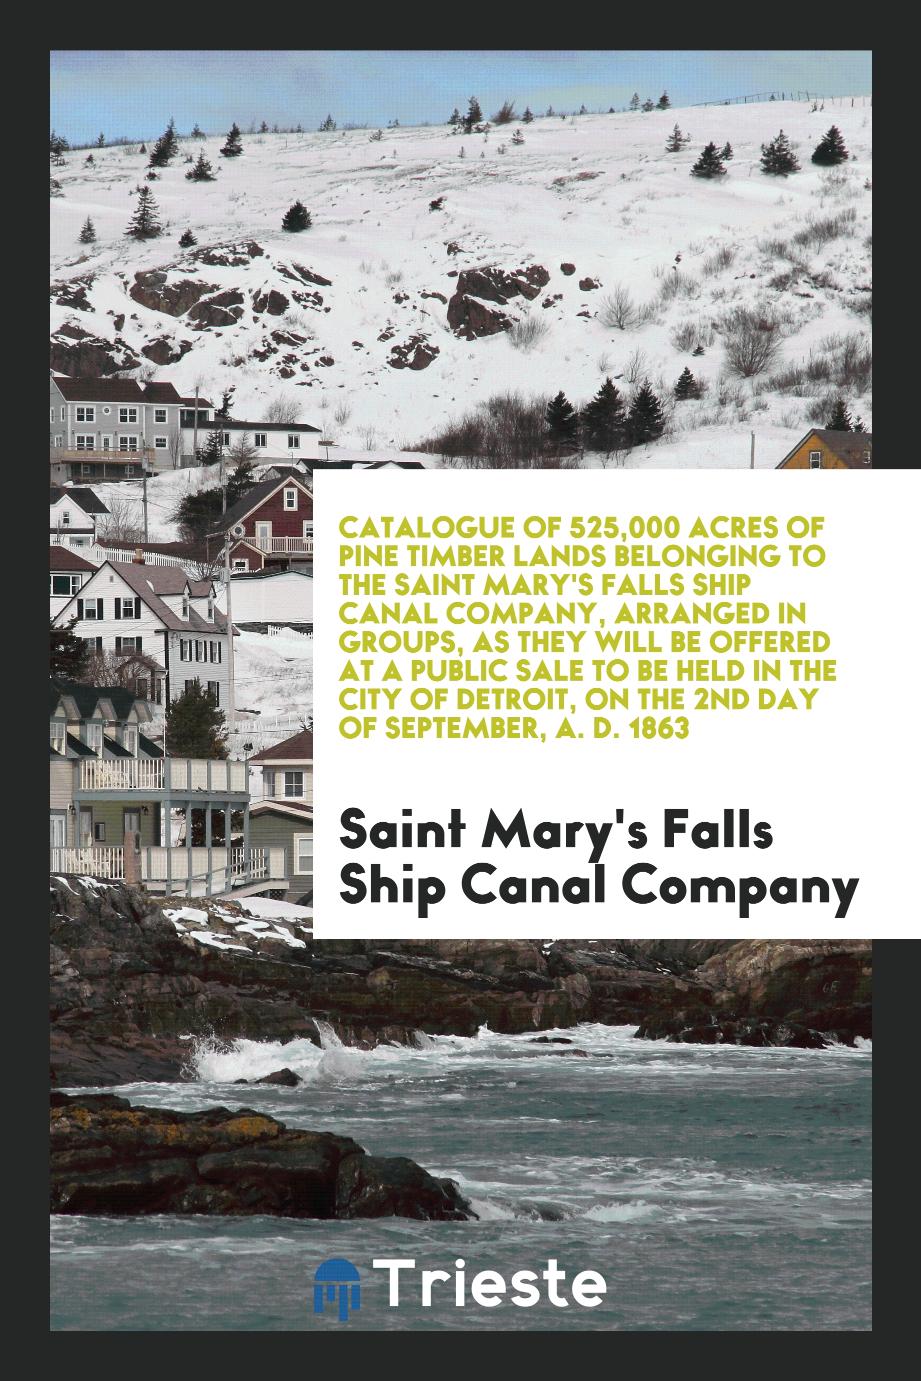 Catalogue of 525,000 Acres of Pine Timber Lands Belonging to the Saint Mary's Falls Ship Canal Company, Arranged in Groups, as They Will Be Offered at a Public Sale to Be Held in the City of Detroit, on the 2nd Day of September, A. D. 1863